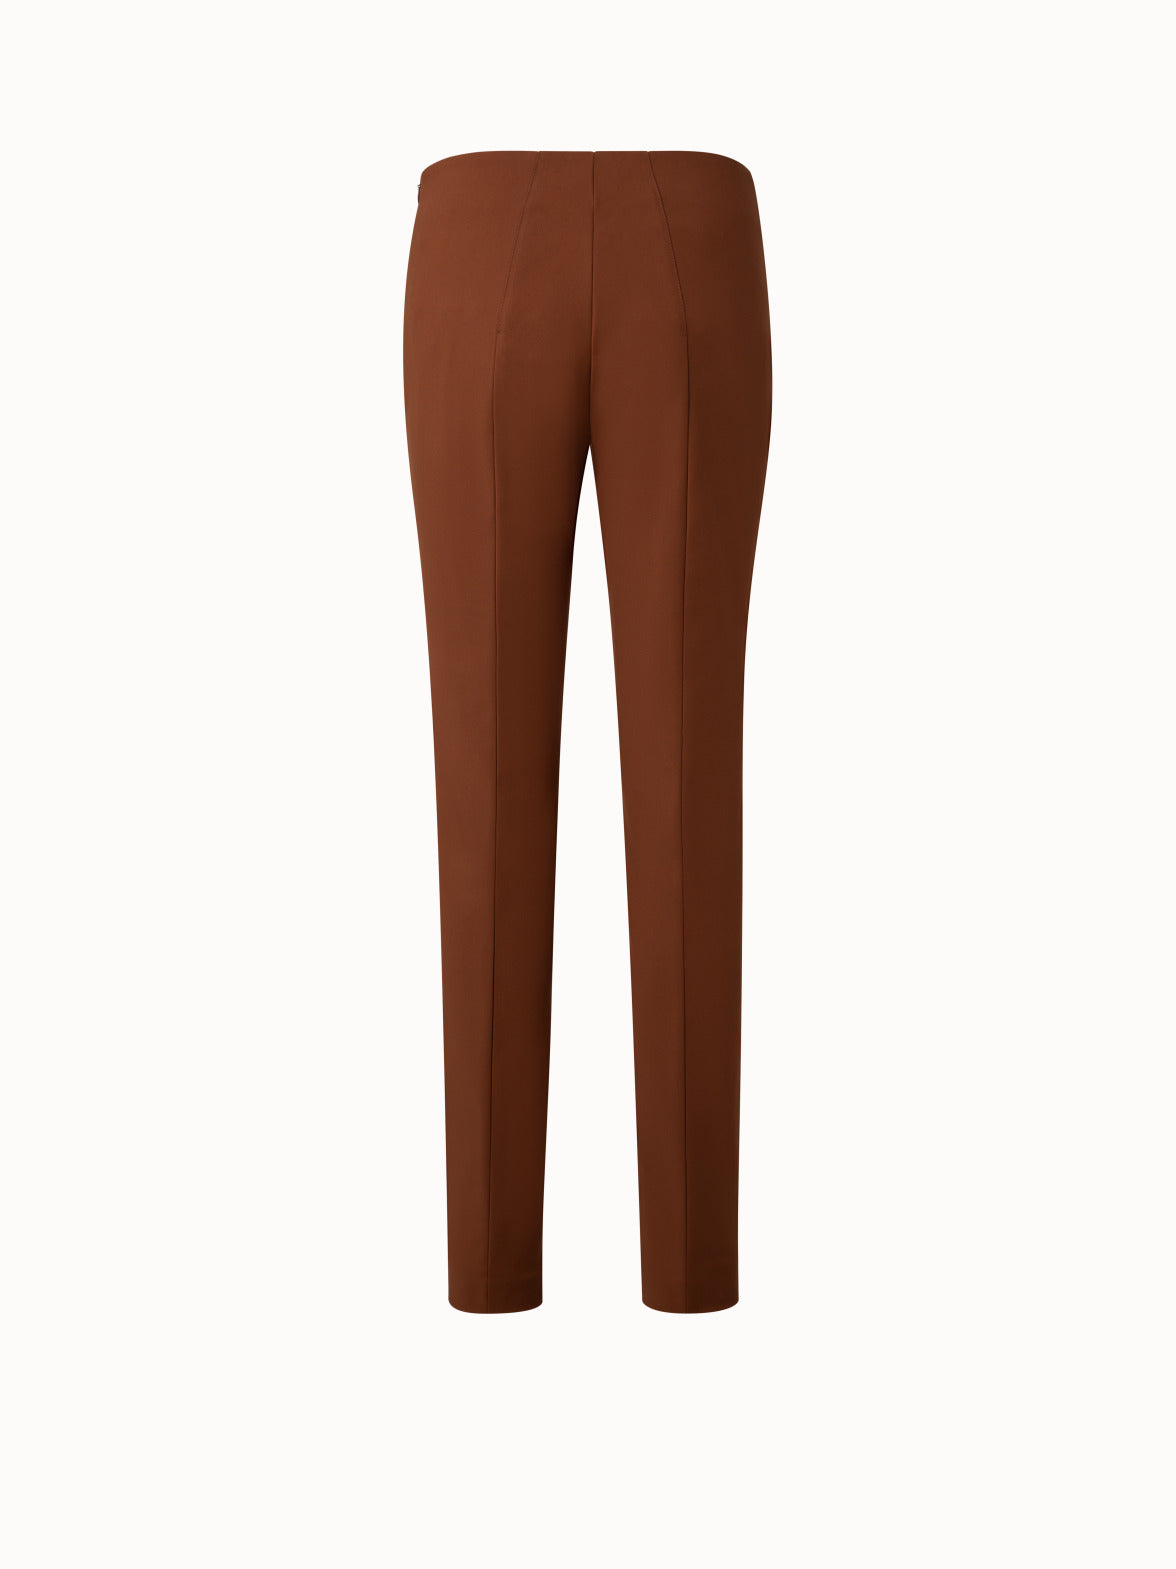 Chocolate brown high waisted pleated year-round Wide leg Pants | Sumissura